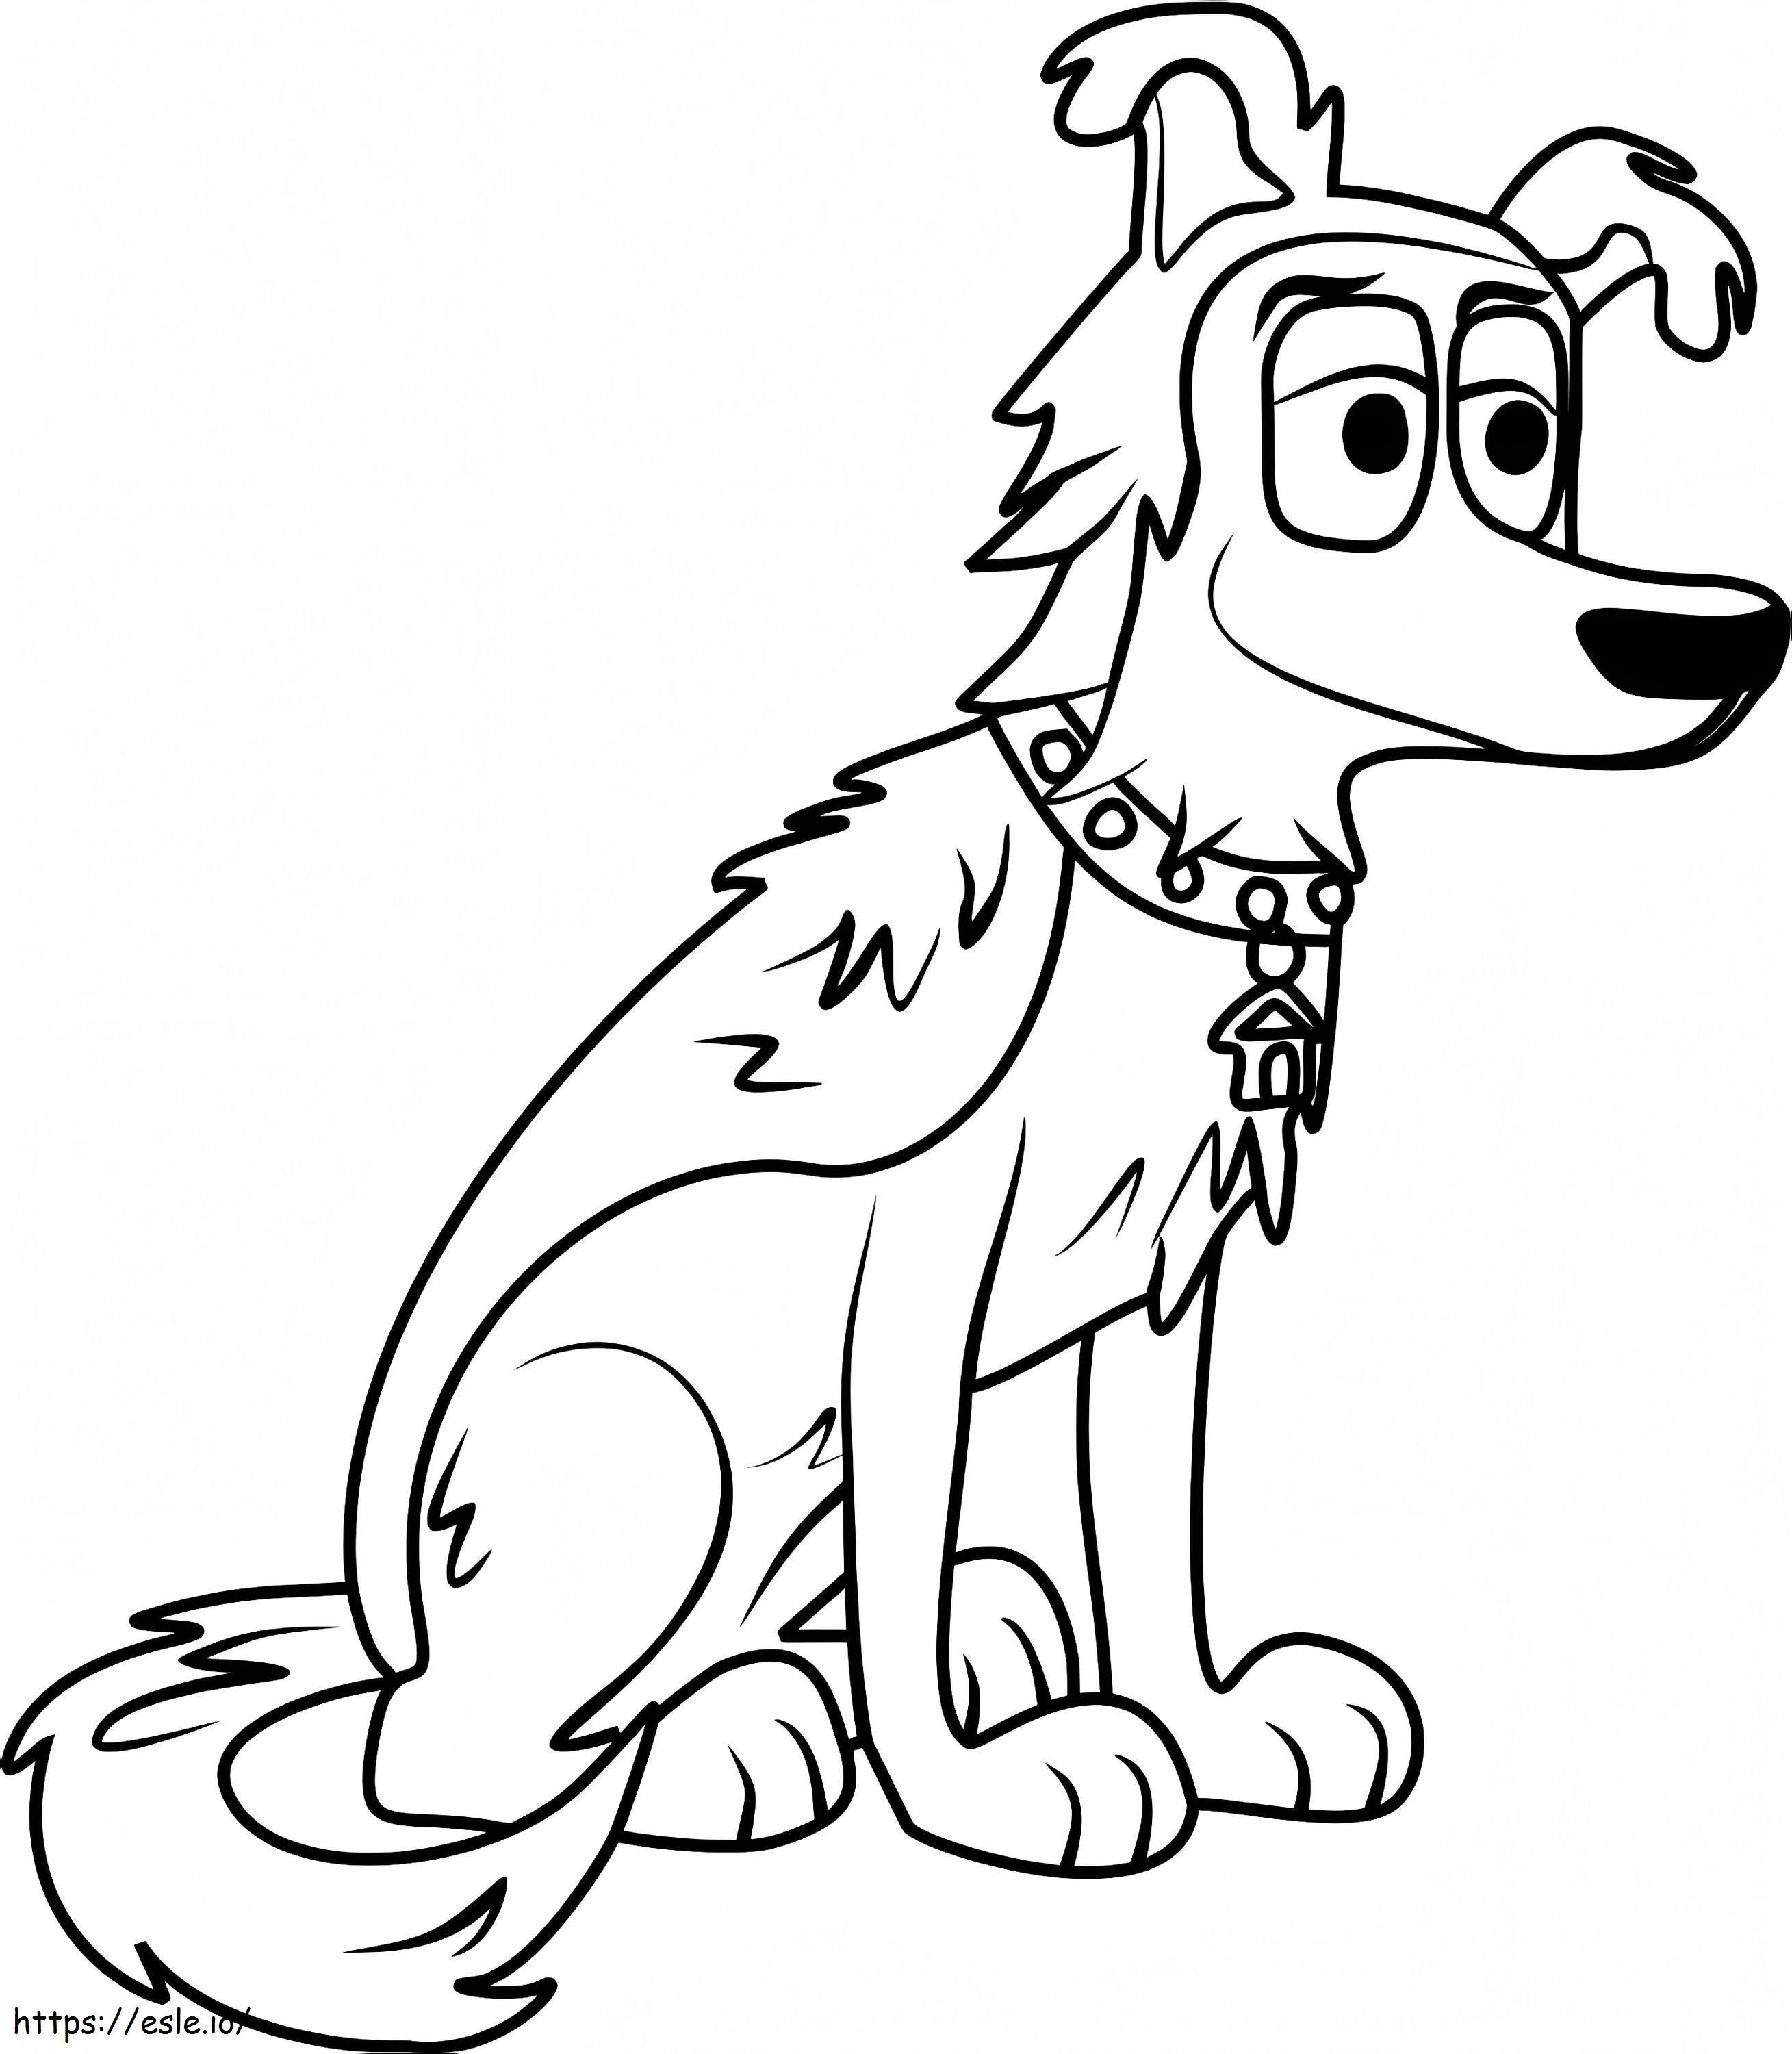 Lucky From Pound Puppies coloring page